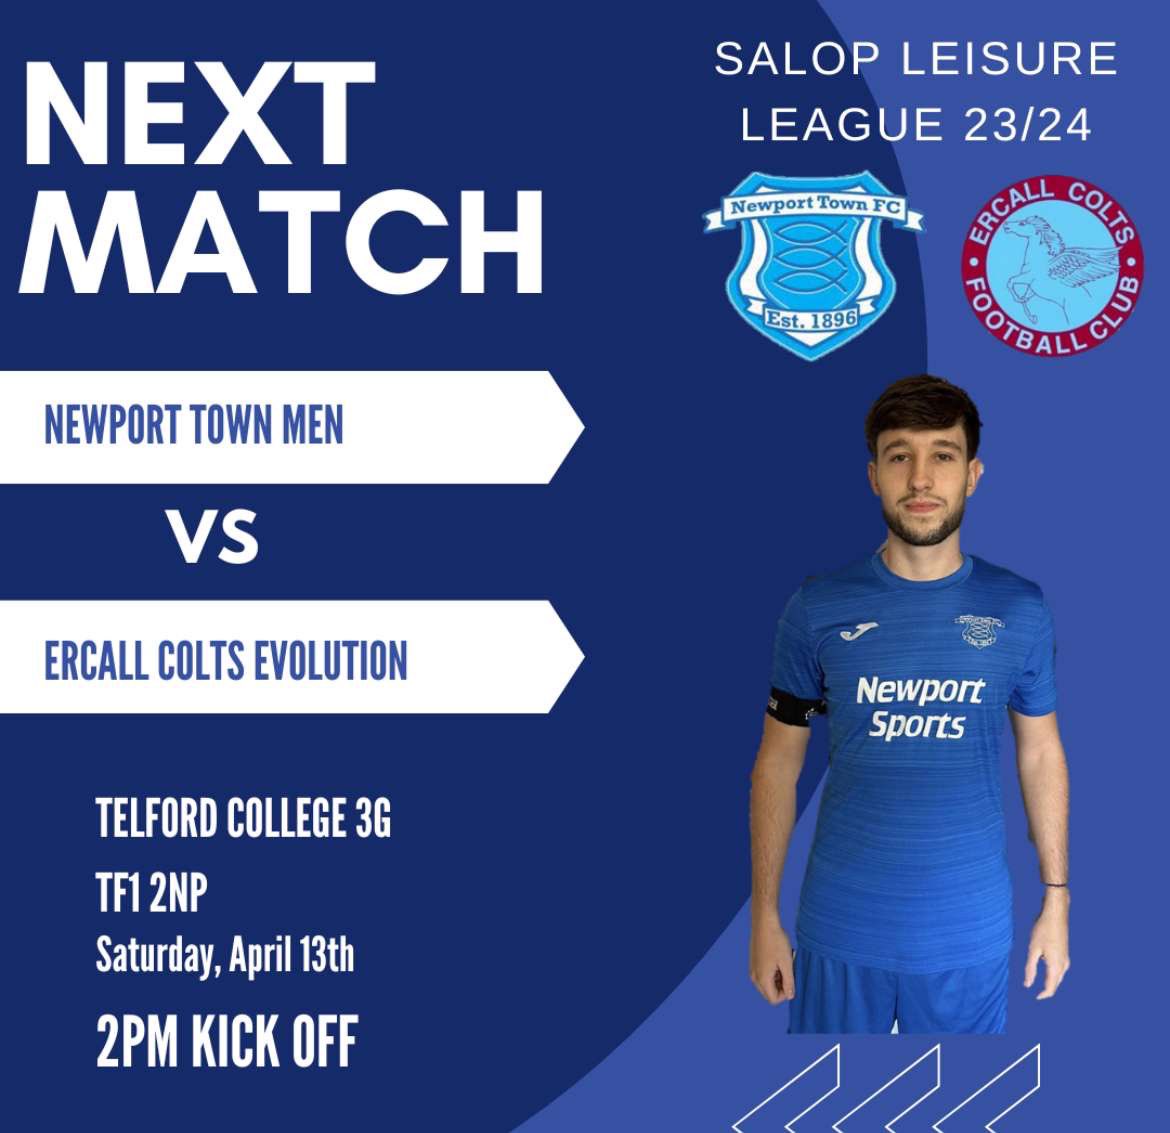 Finally a return to action! With Shuker still waterlogged, tomorrows home game will now be played at TCAT. A big thank you to @ErcallColtsMen for helping to sort the pitch! Come down and support the lads 🐟💙 #UpTheTown #threefishes @NewportTownMens @wtshrewisaway